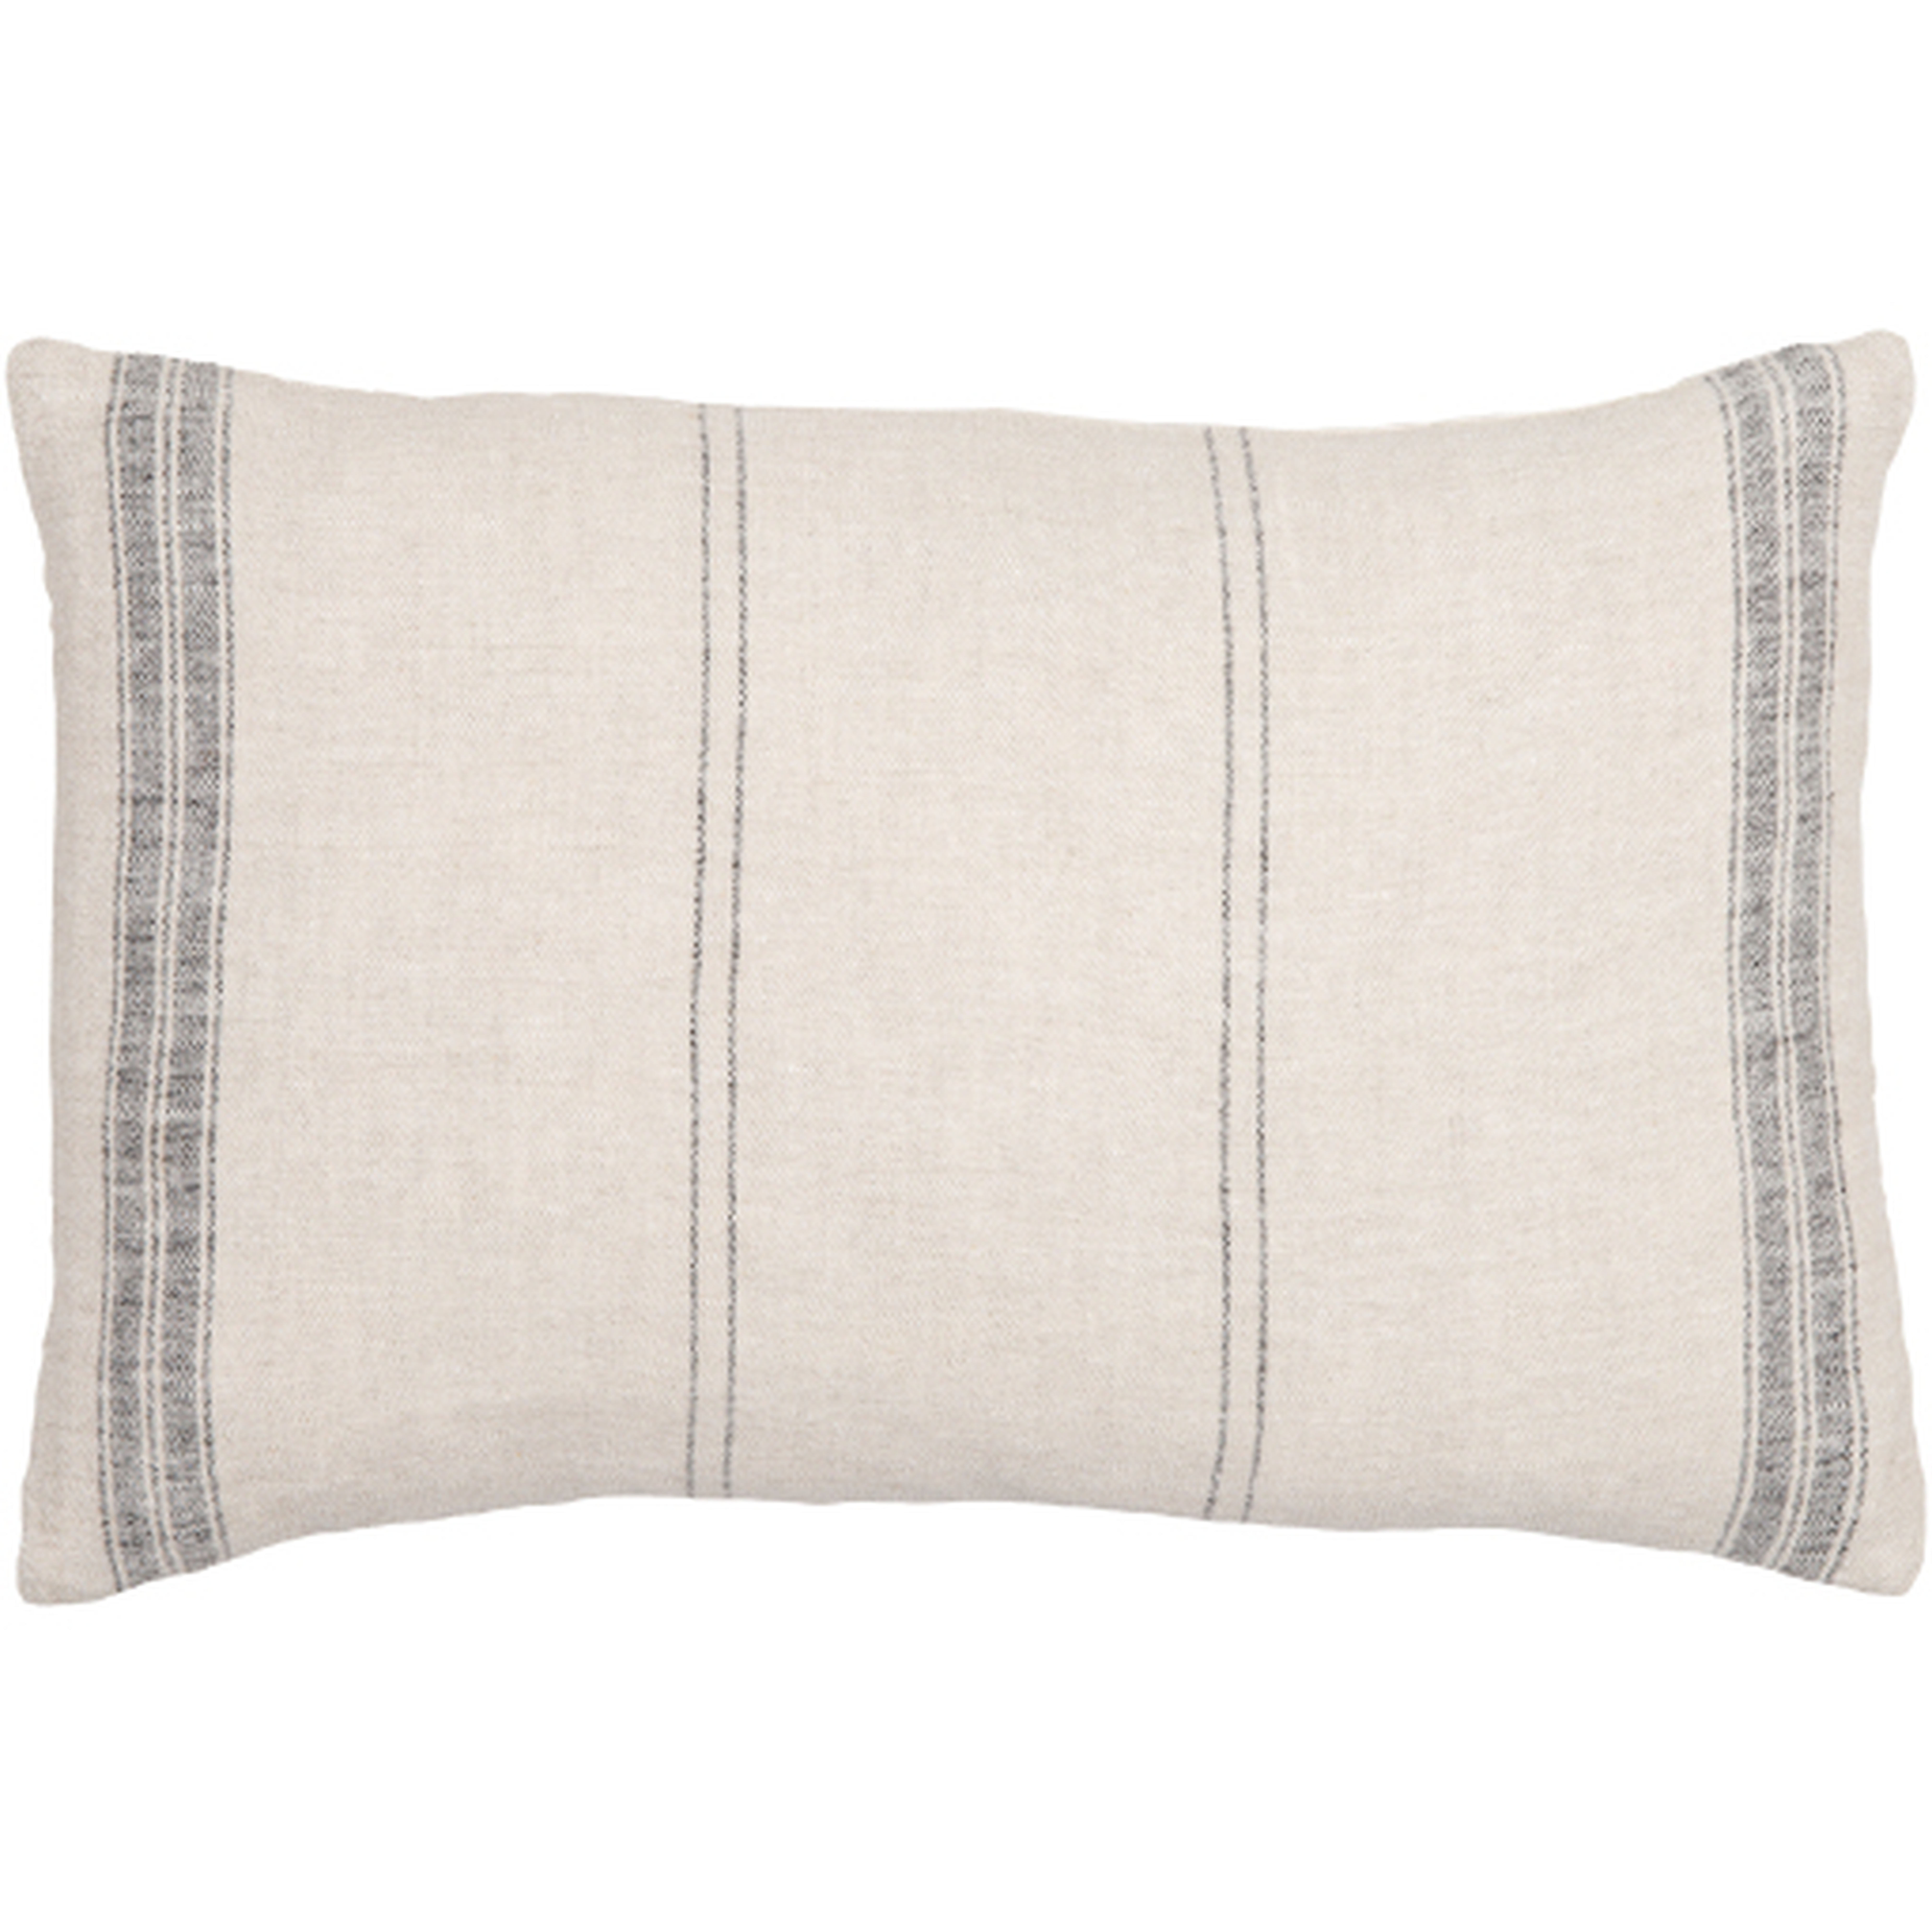 Linen Stripe Vintage Throw Pillow, Small, with poly insert - Surya